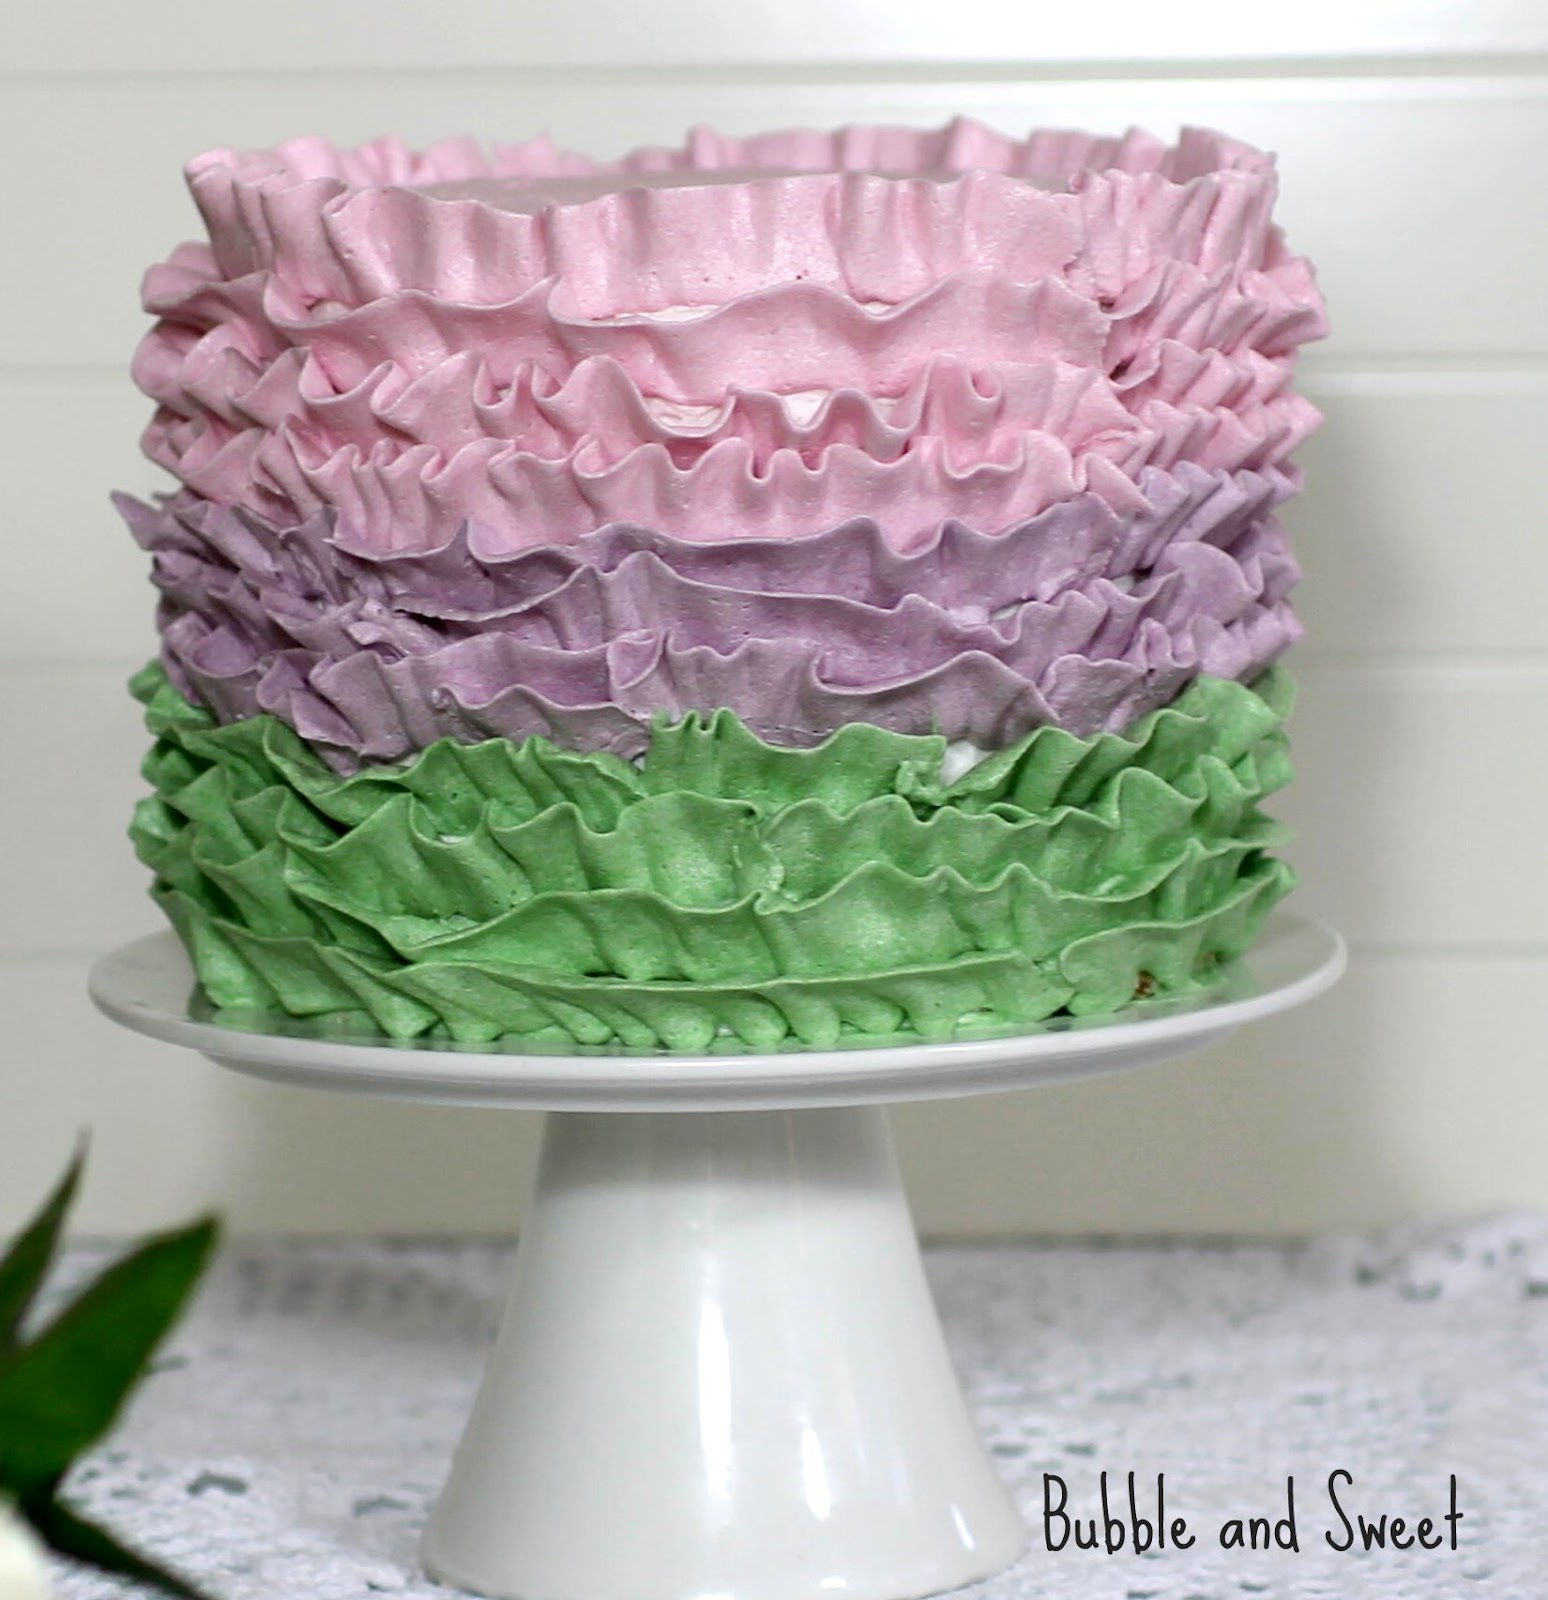 Bubble and Sweet: How to make a ruffled buttercream rainbow cake